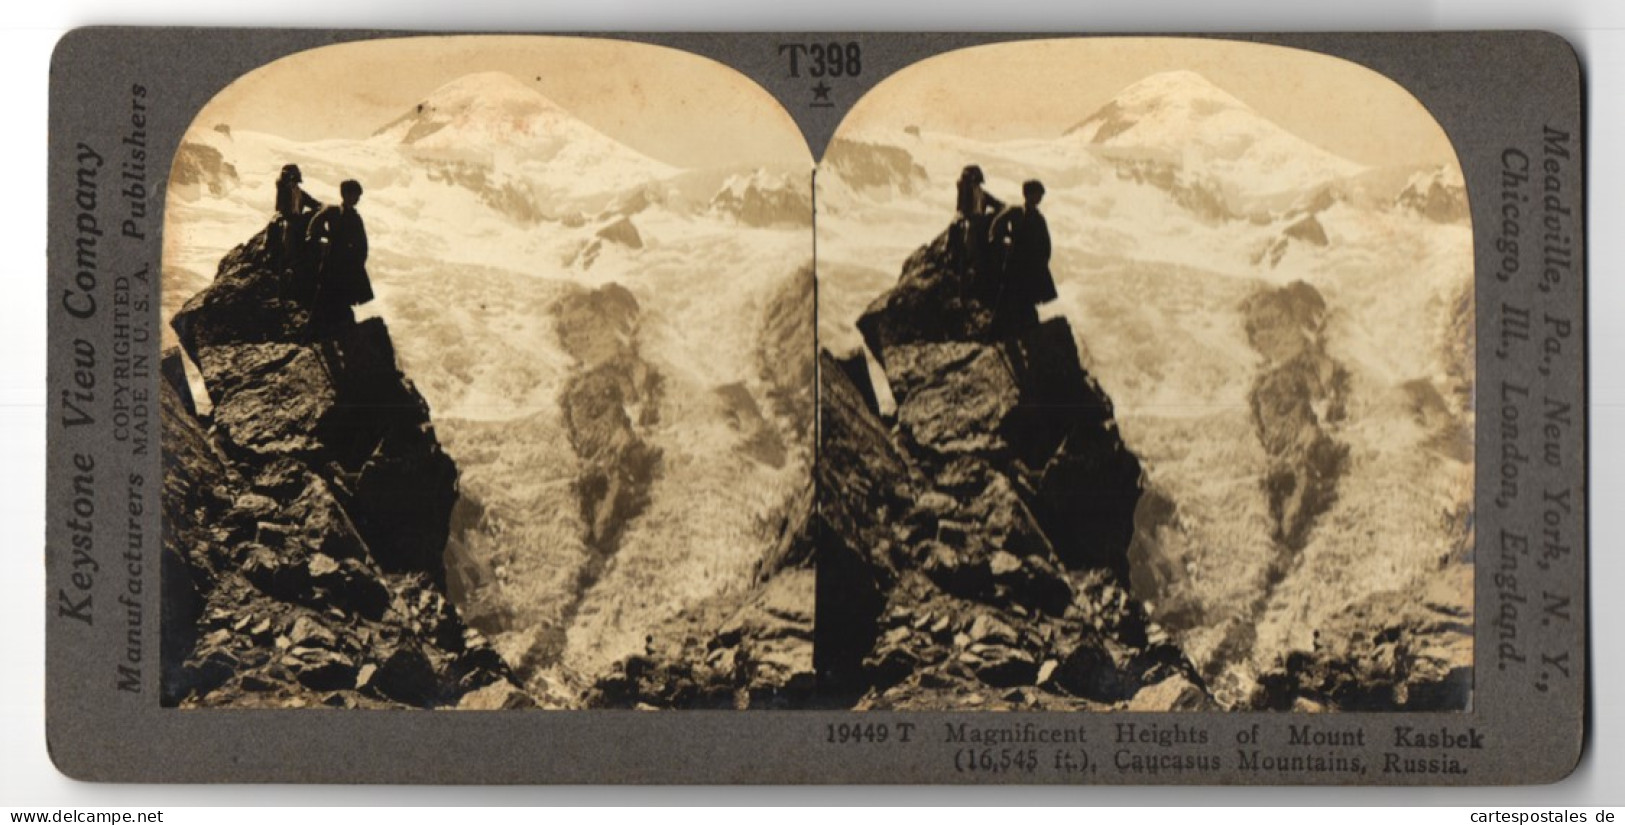 Stereo-Fotografie Keystone View Co., Meadville, Ansicht Stepanzminda, Magnificent Heights Of Mount Kasbek, Caucasus  - Stereo-Photographie